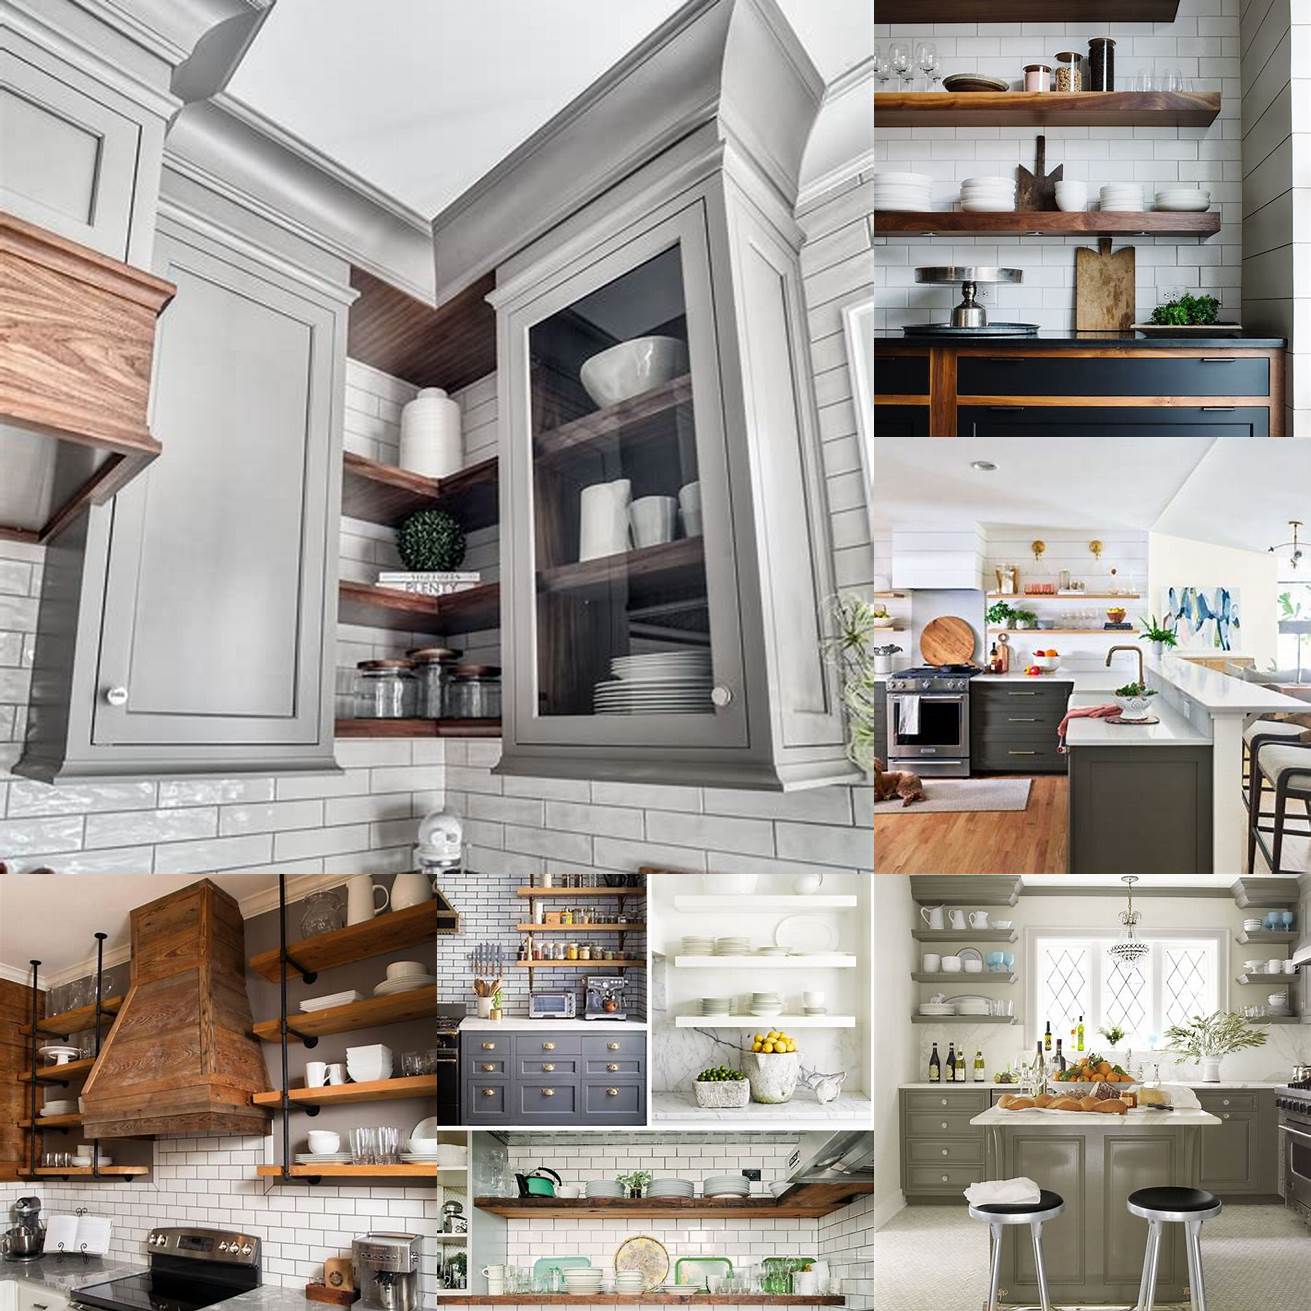 Gray kitchen cabinets with open shelving